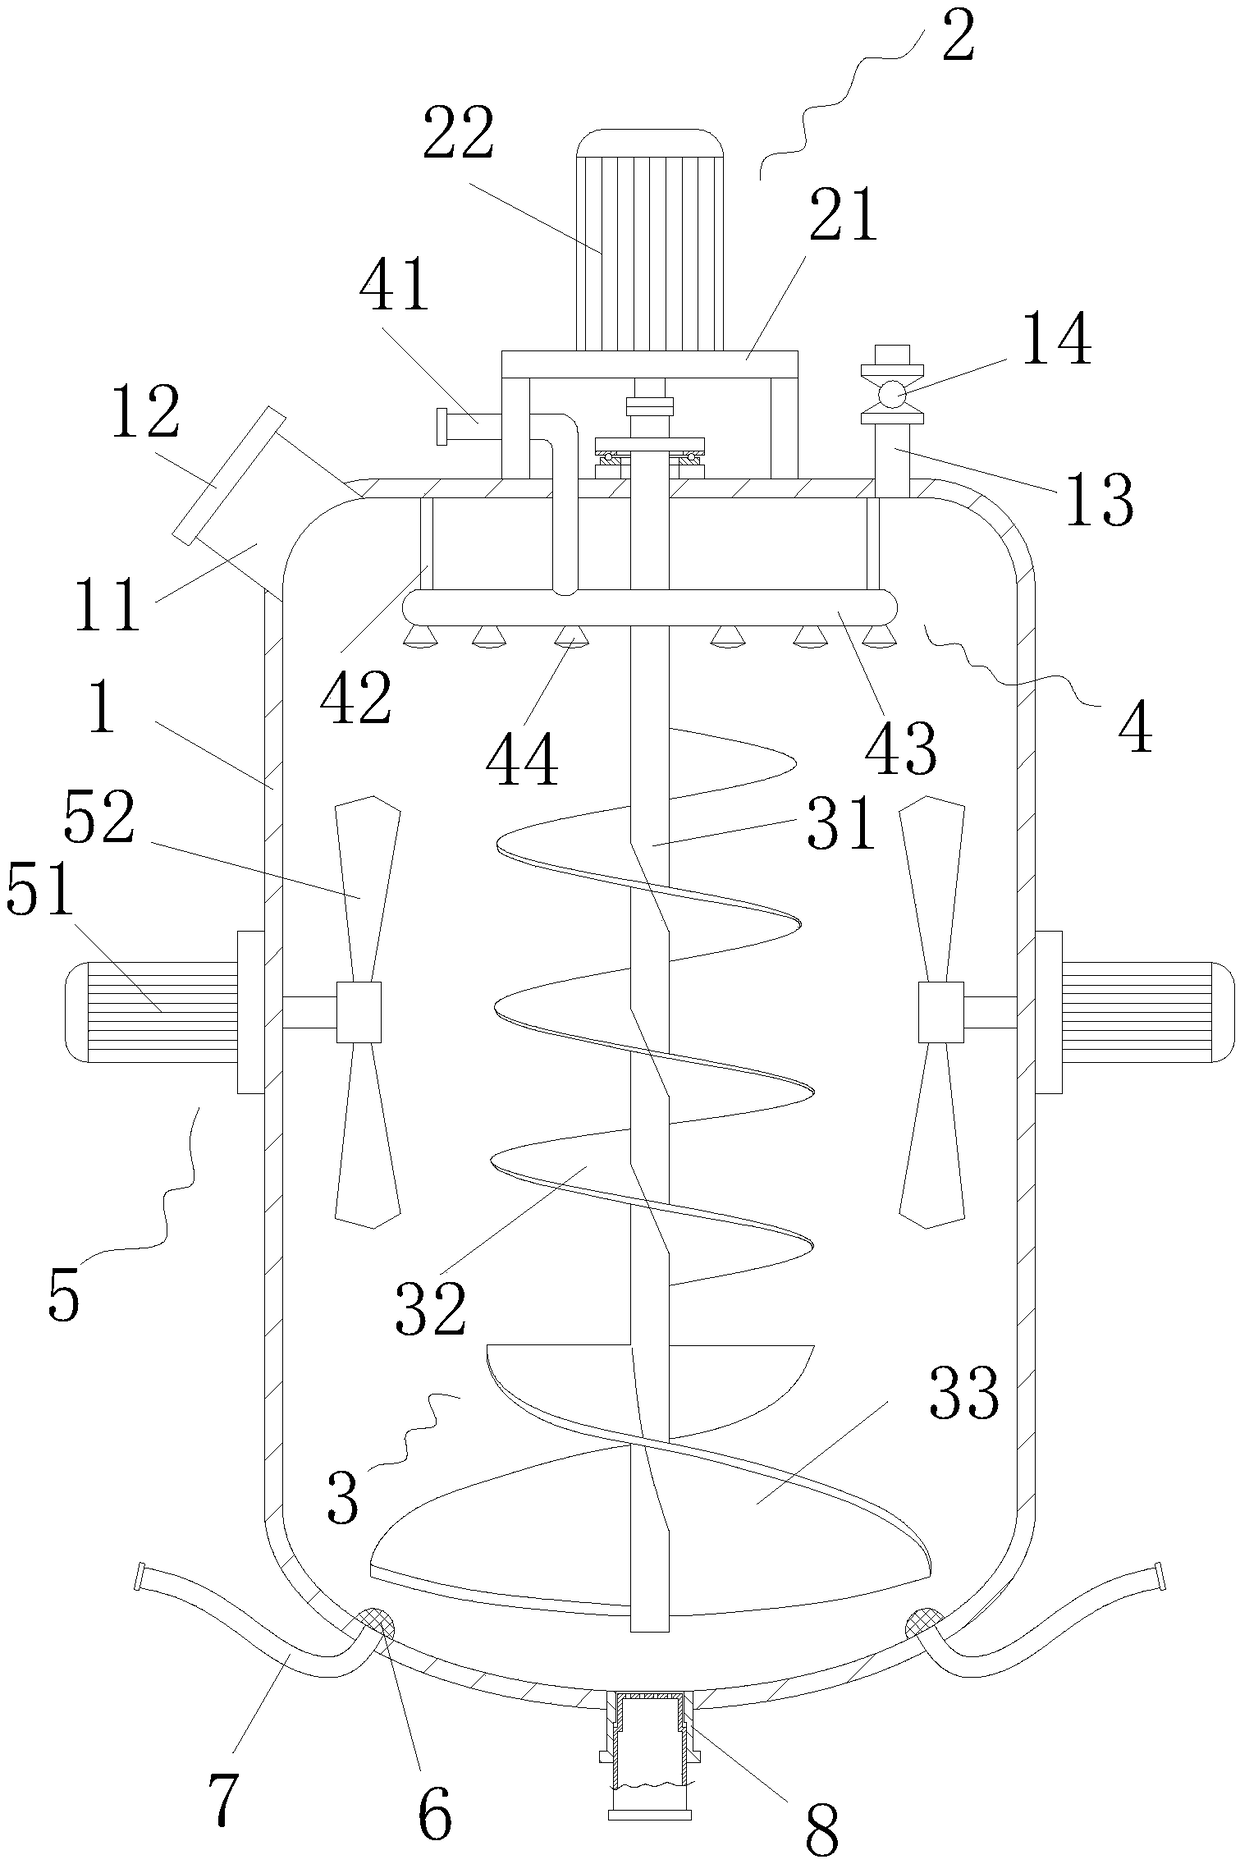 Raw material cooking apparatus for producing soy sauce